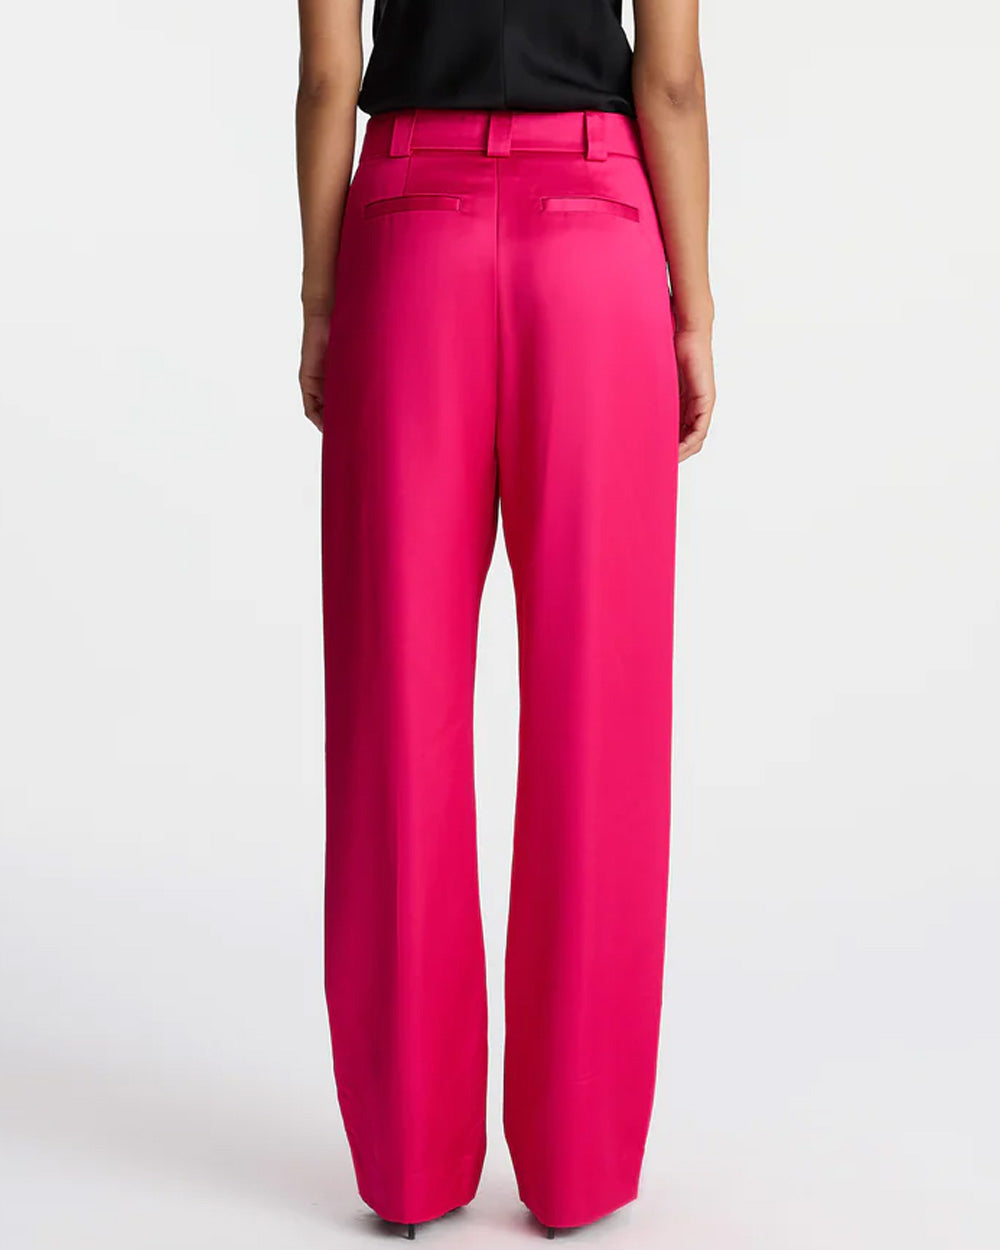 Disco Pink Structured Fynn Pant